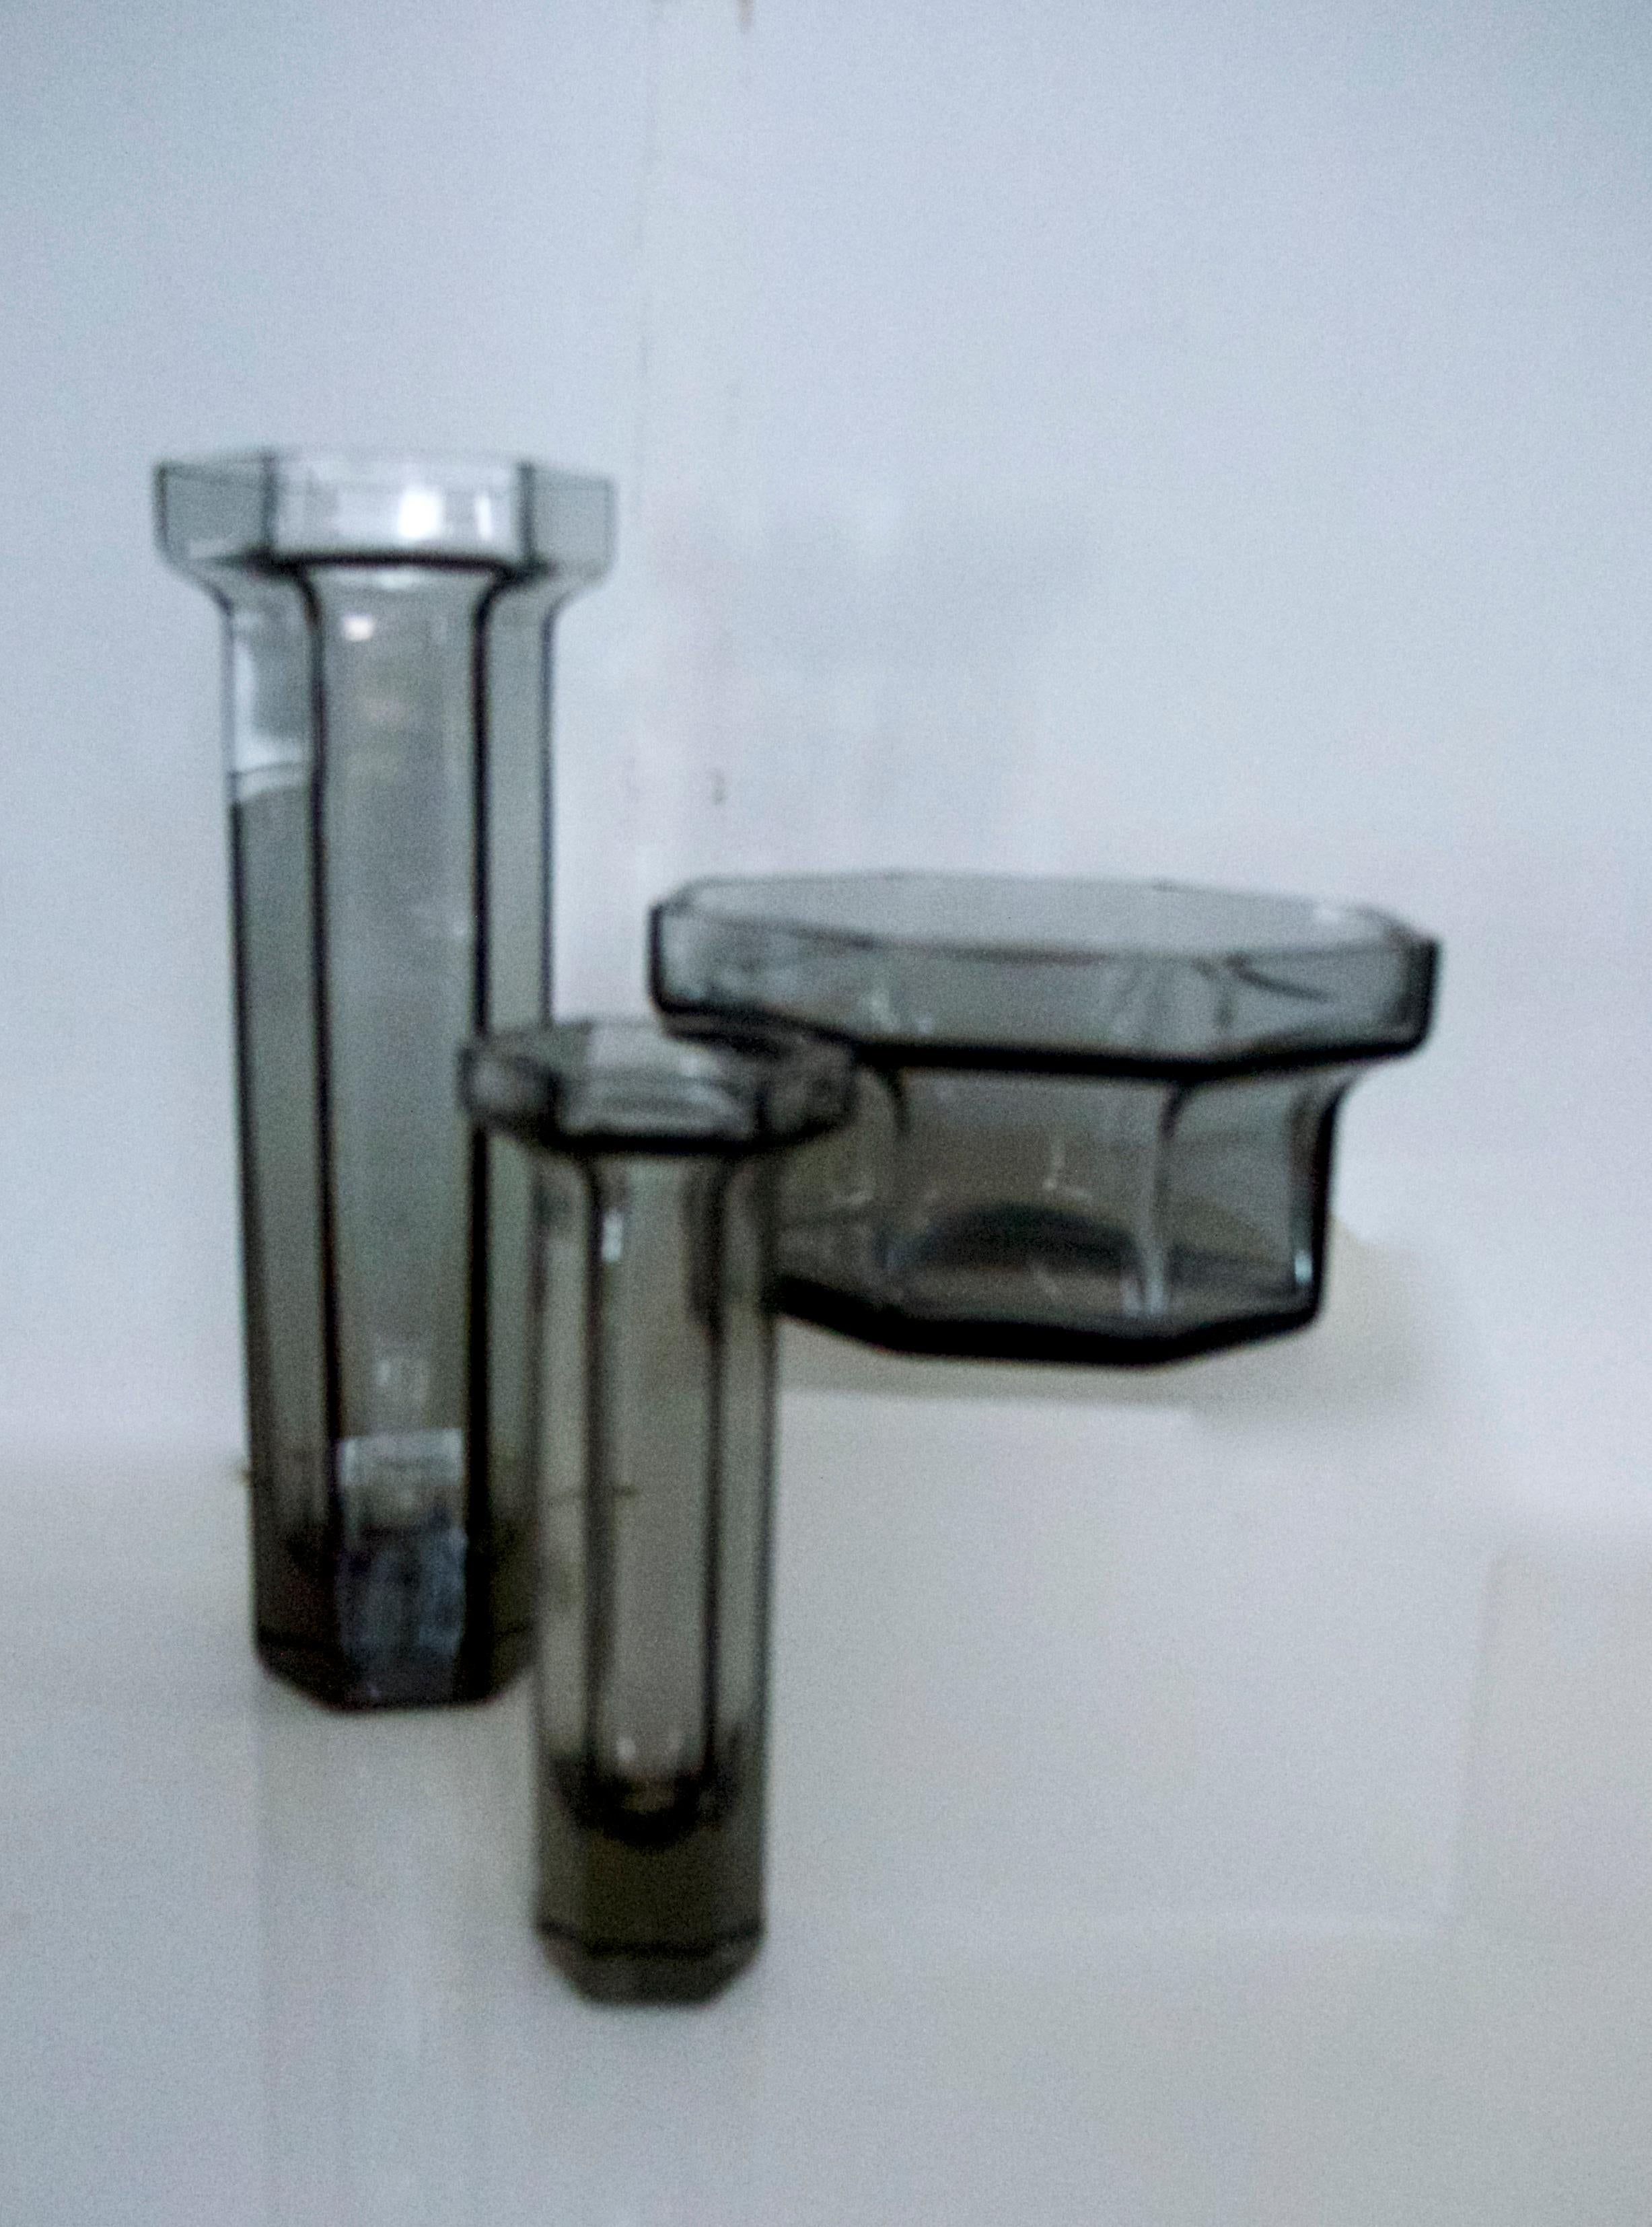 Modernist Frank Thrower three-piece glass candleholders 'BRUTUS' collection Wedgewood, 1970.

Measures: Large candleholder - six sides
Height 25 cms
Diameter 9 cms
Weight 0.0996 kgs

Small candleholder - six sides
Height 16 cms
Diameter